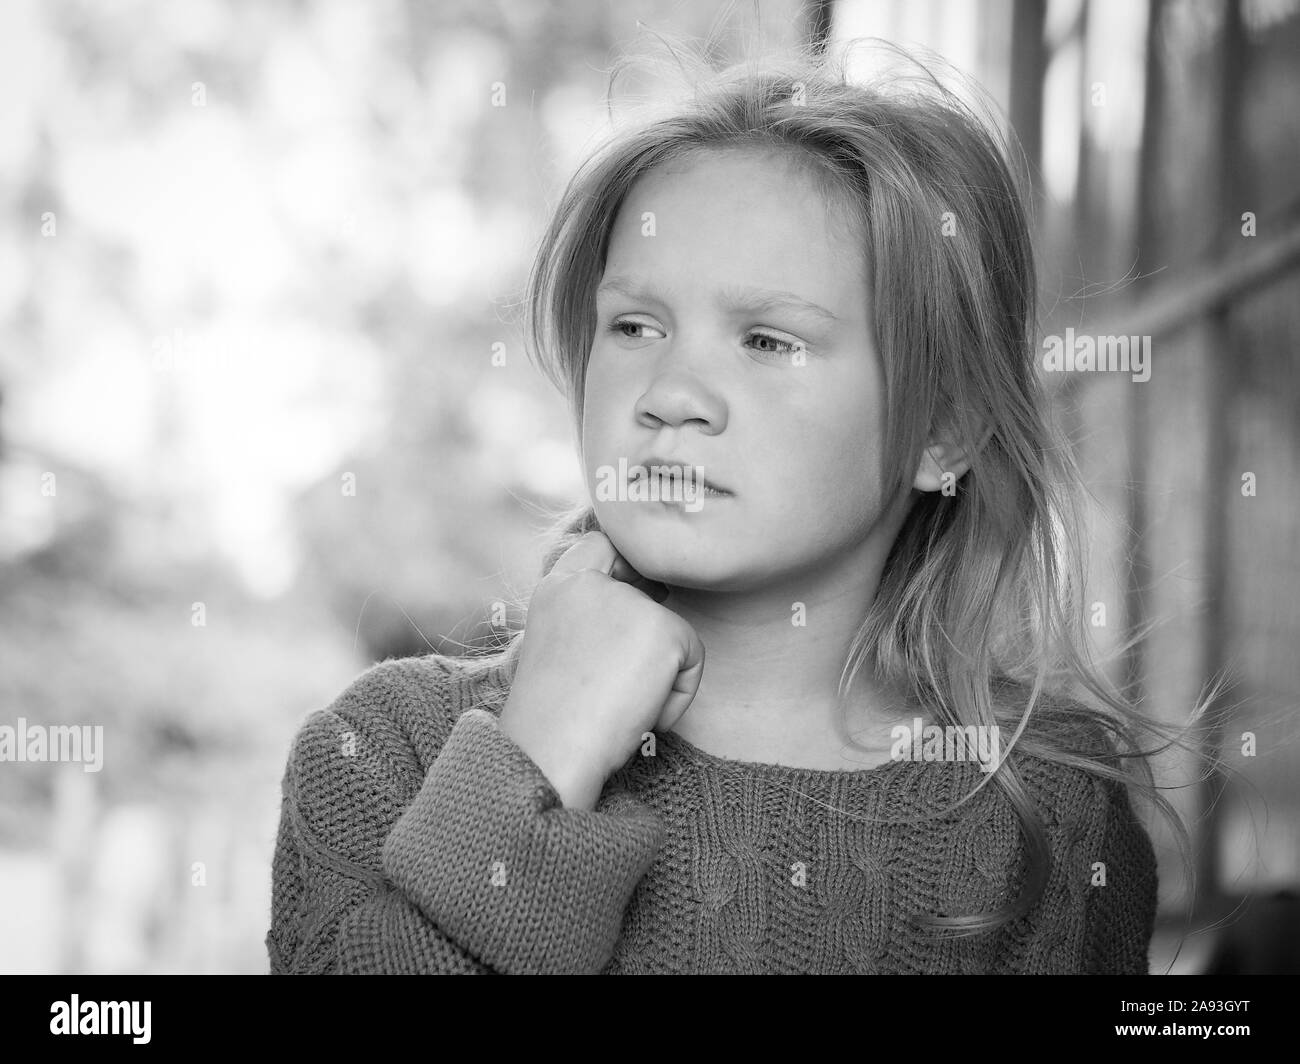 Portrait of a girl. The child looks away thoughtfully. Beautiful face and hair Stock Photo